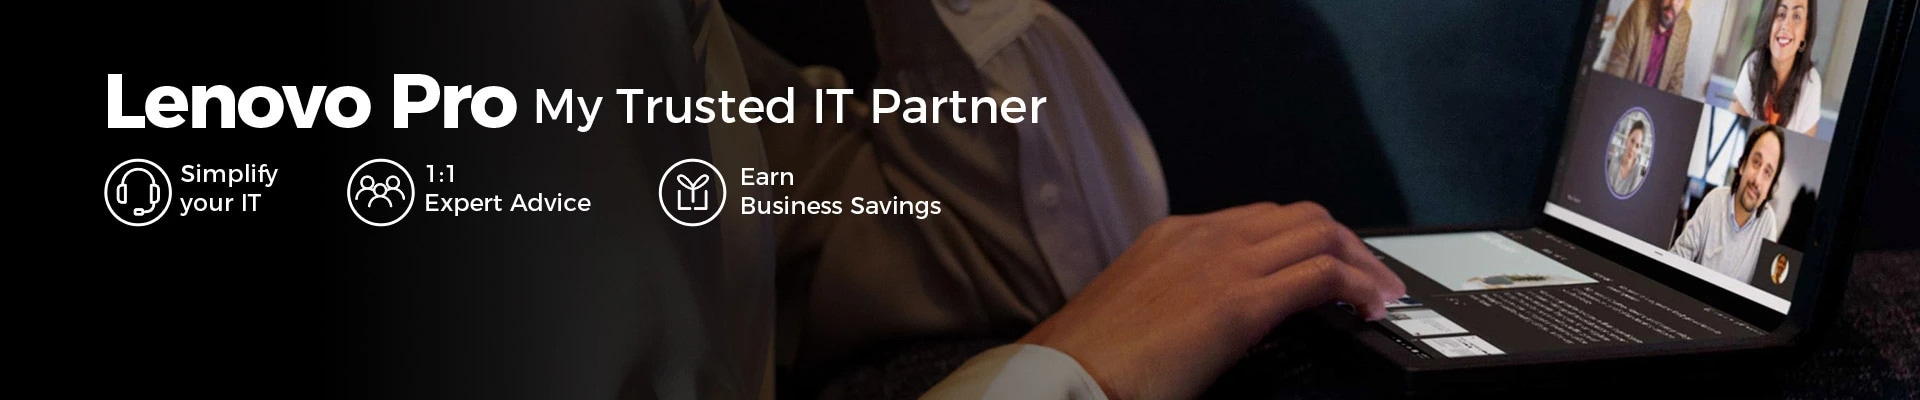 Lenovo Pro, Your Trusted IT Partner